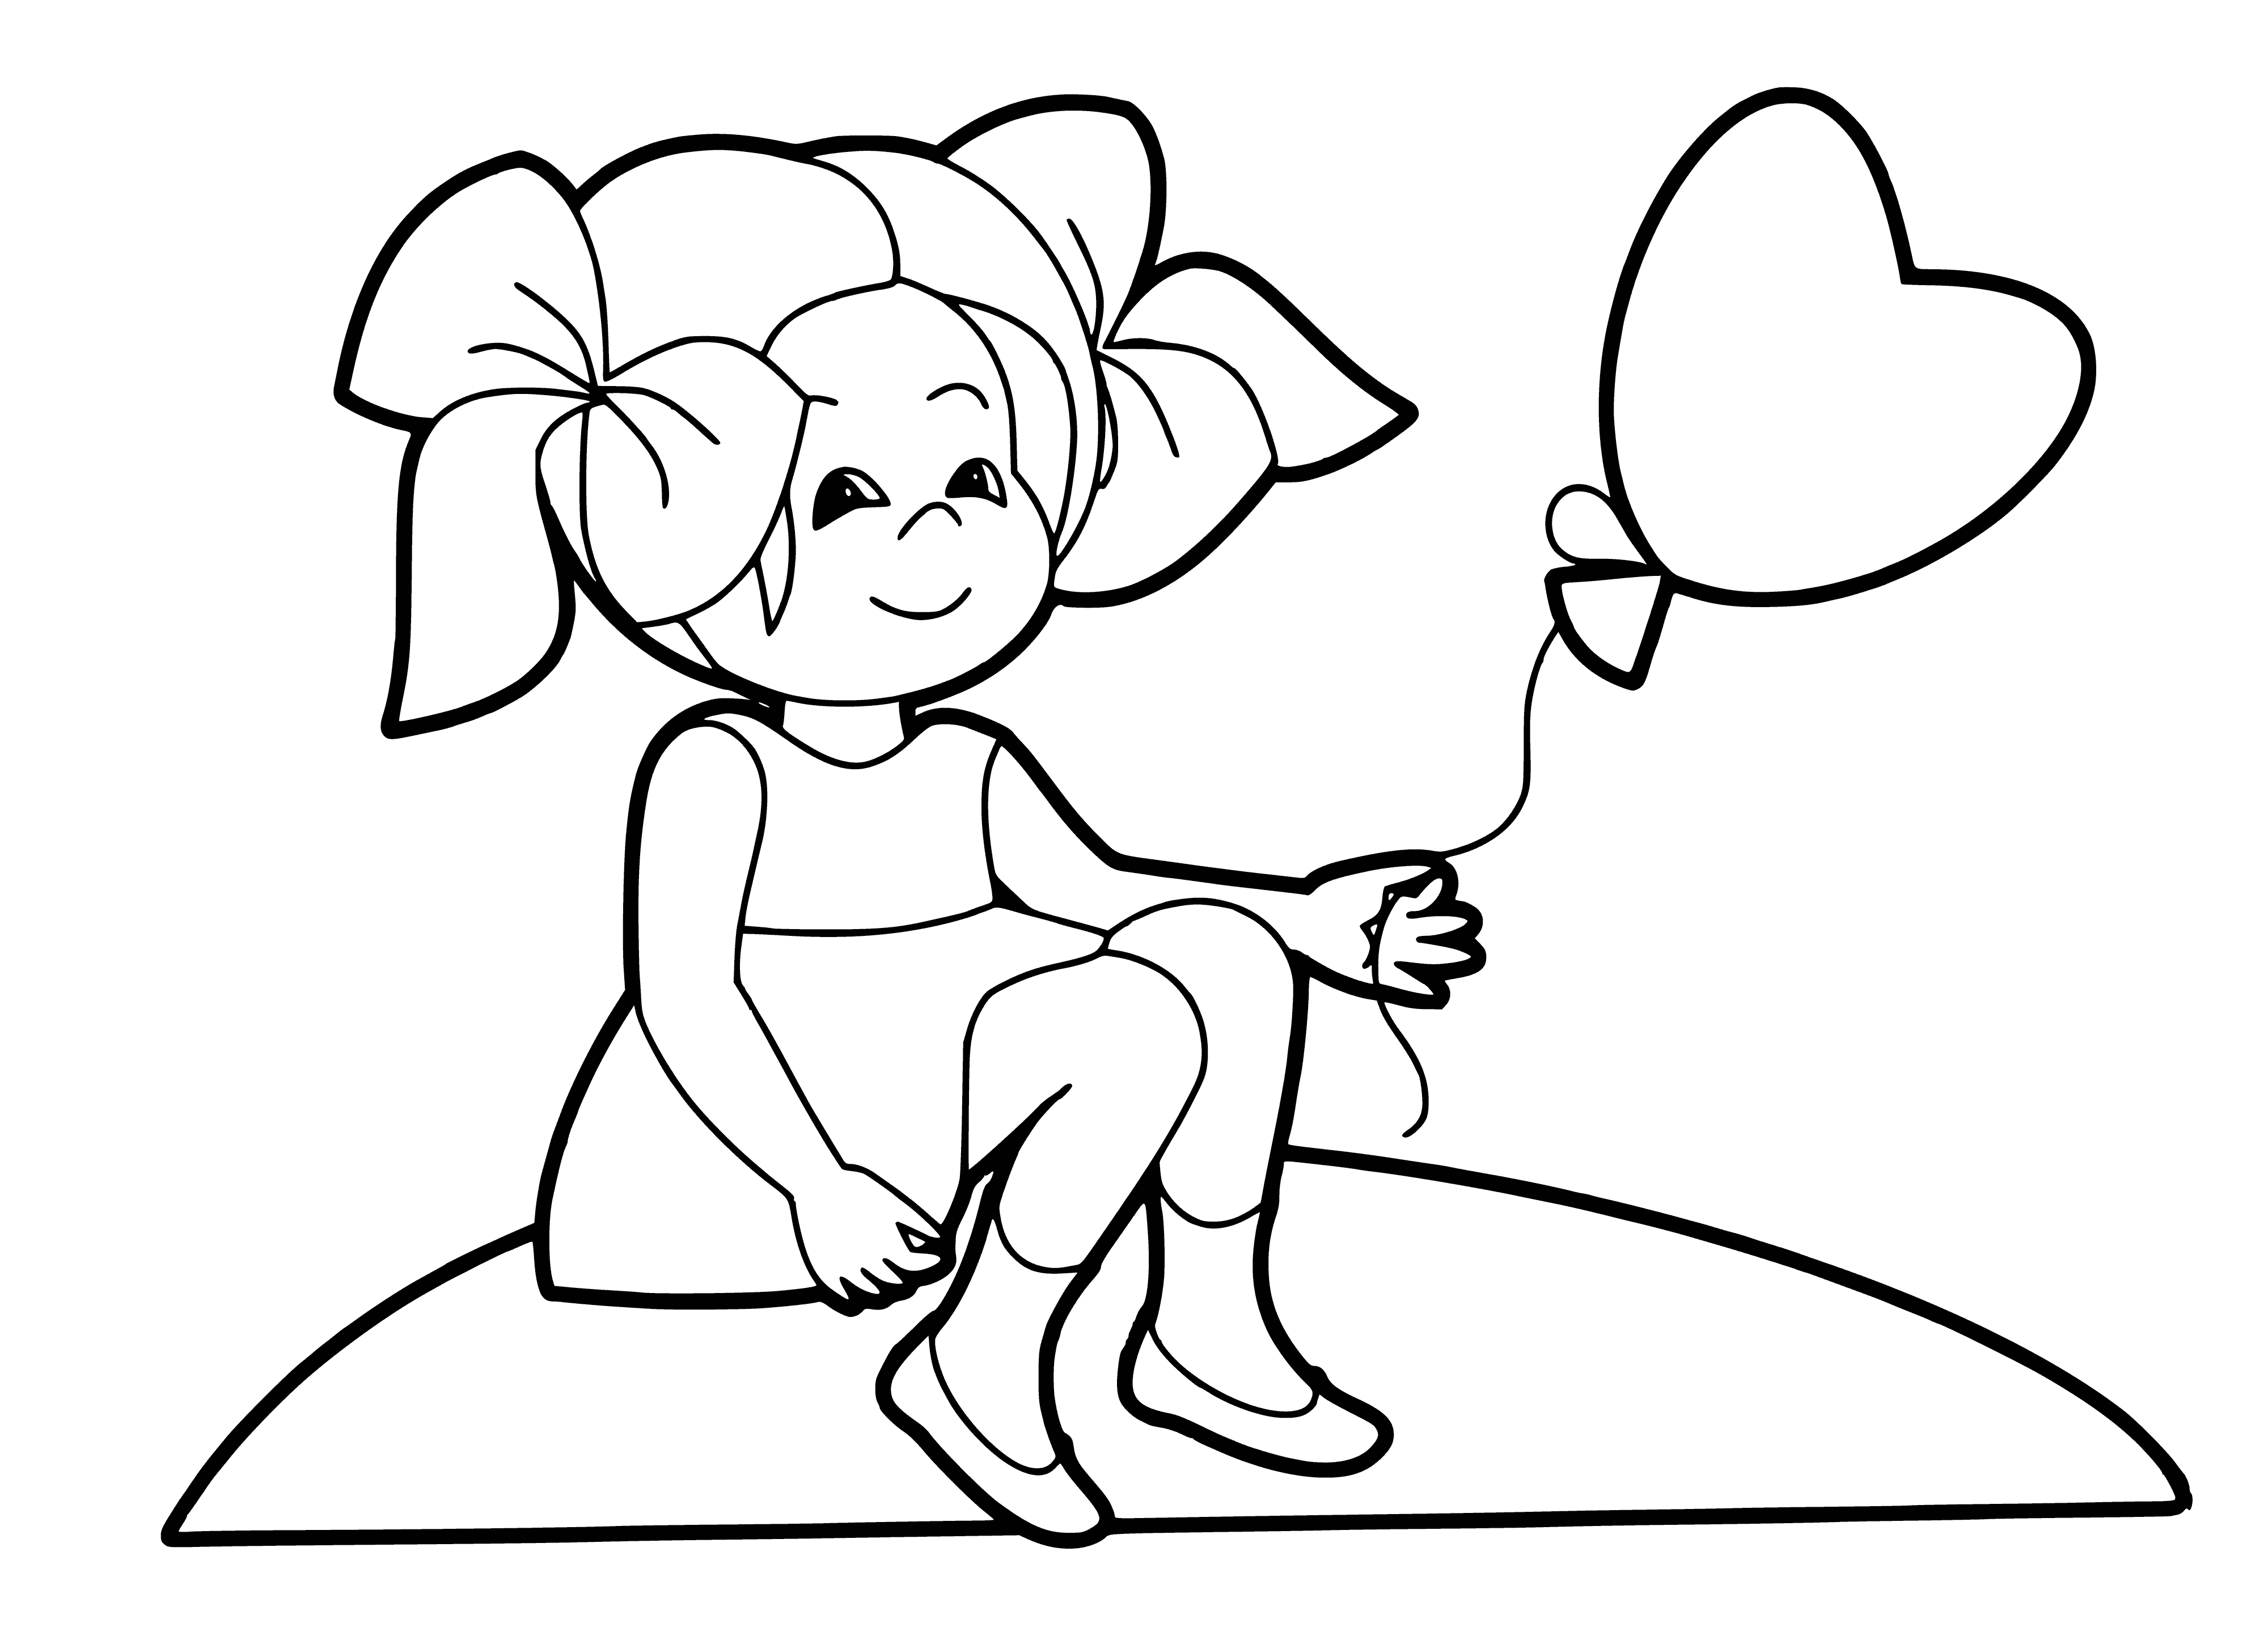 coloring page: Girl holds red balloon, smiling in coloring page—joyful reminder of childhood.